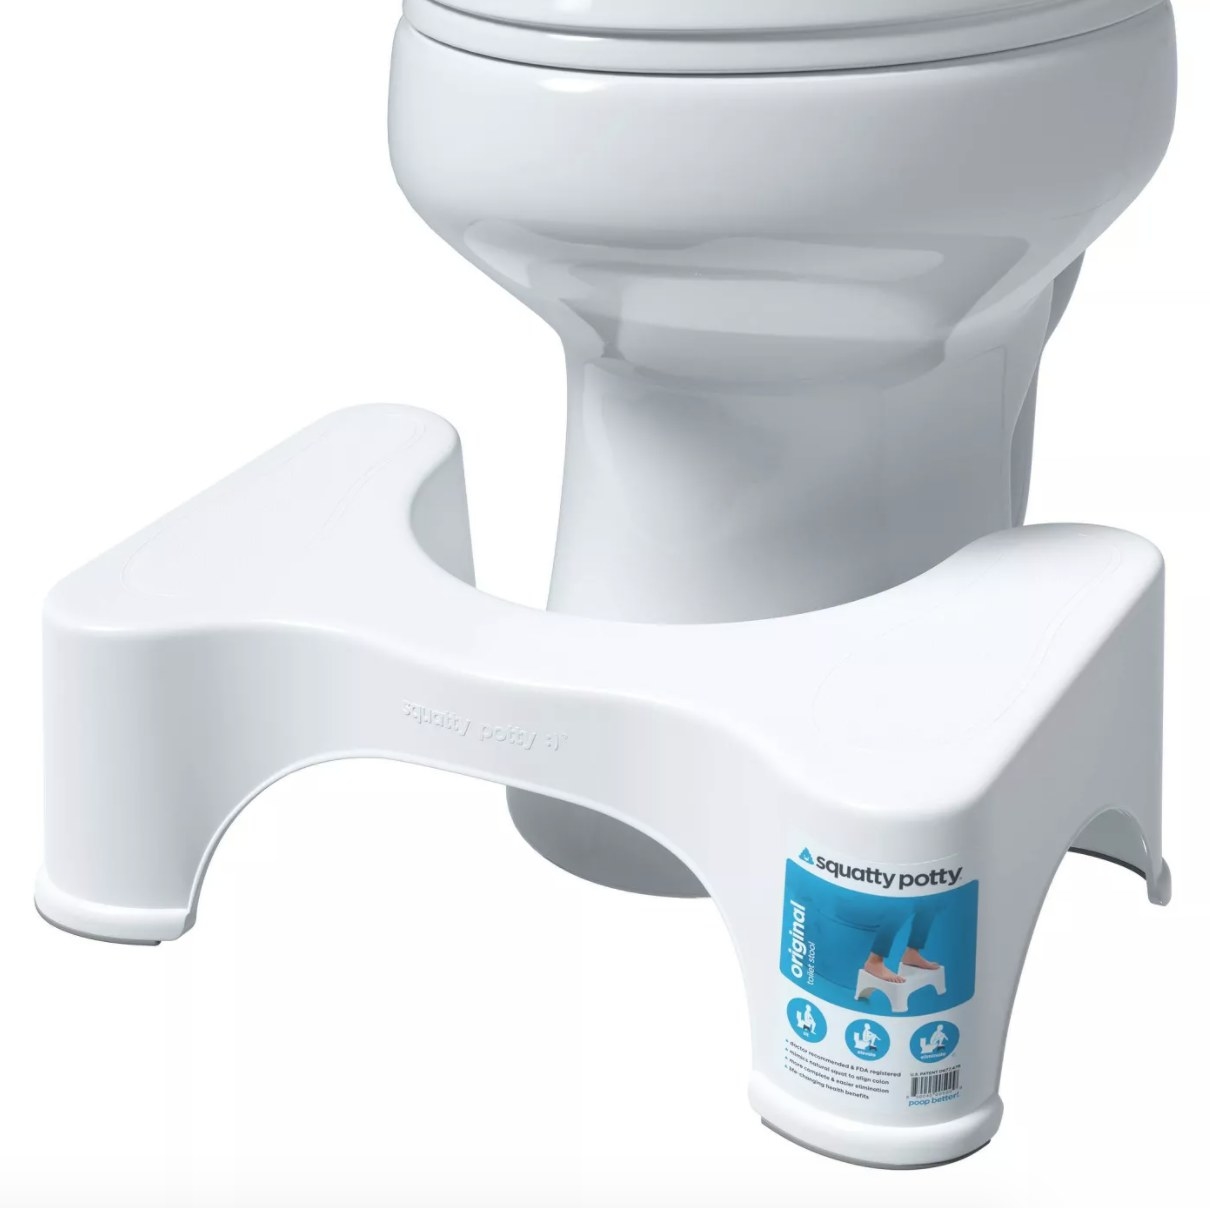 A white plastic Squatty Potty that lifts up your feet as you sit on the toilet